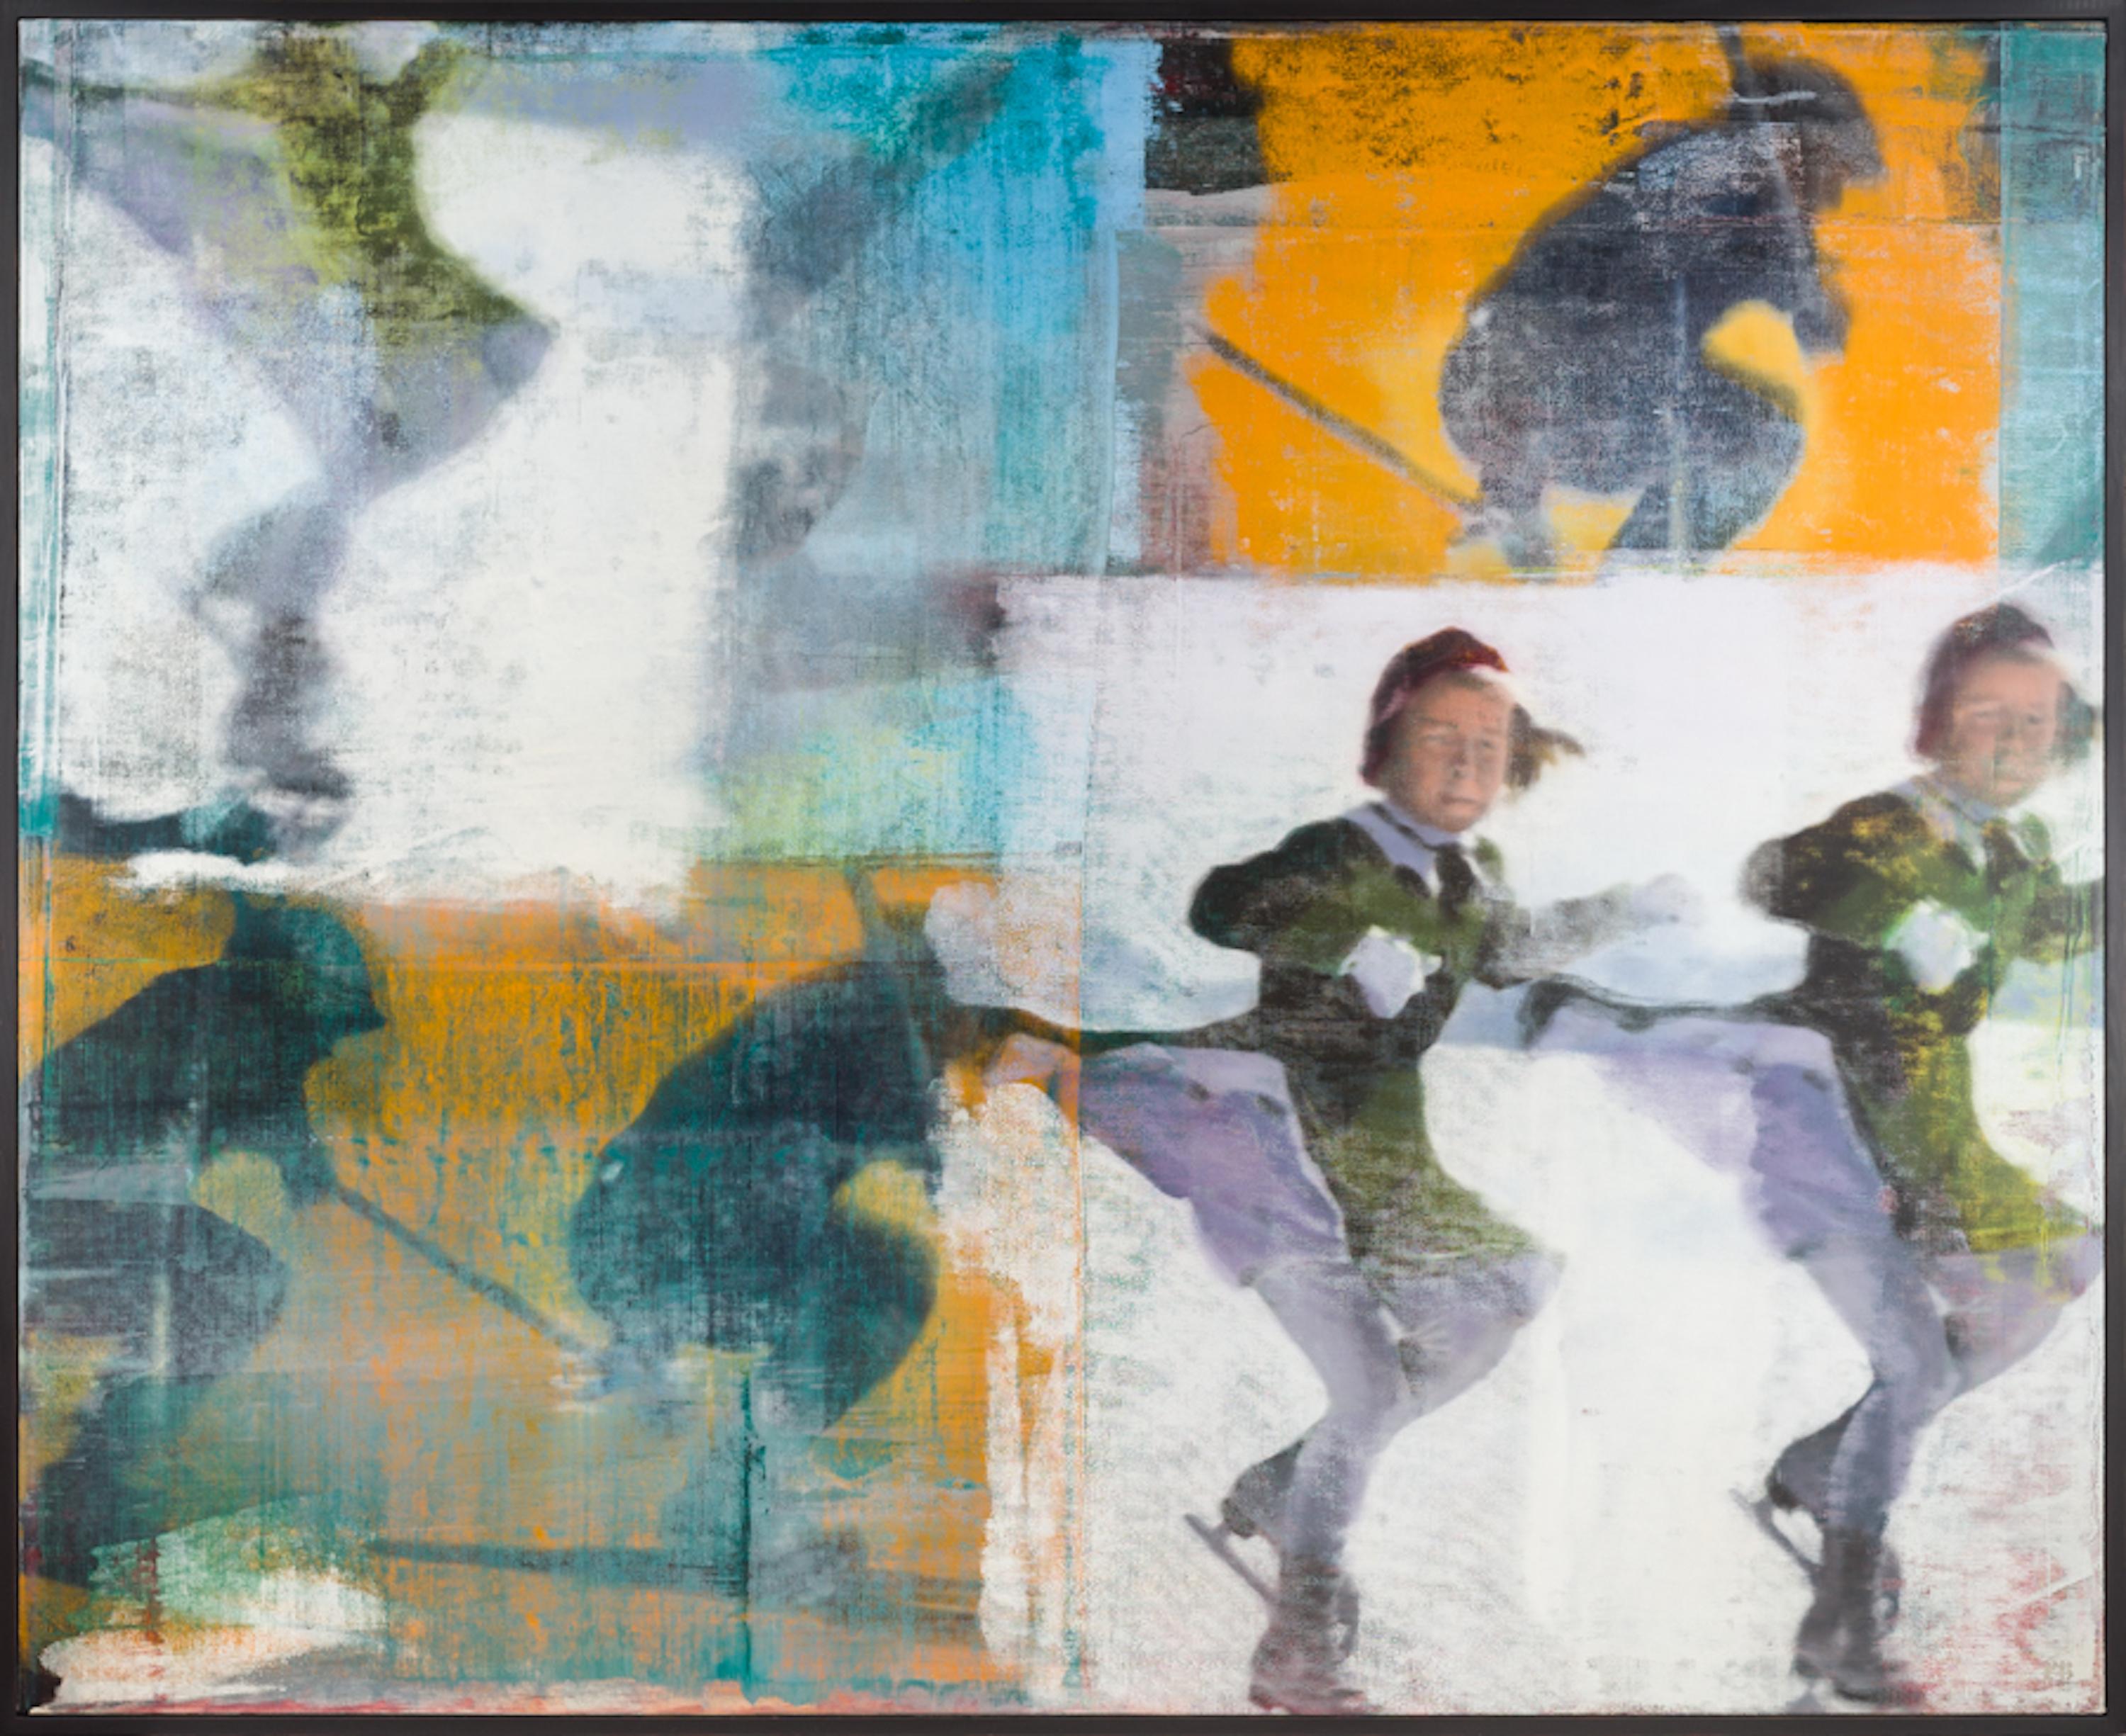 Philip Buller Figurative Painting - "Jumpers" Contemporary Figurative Abstract Oil on Linen on Panel Framed Painting